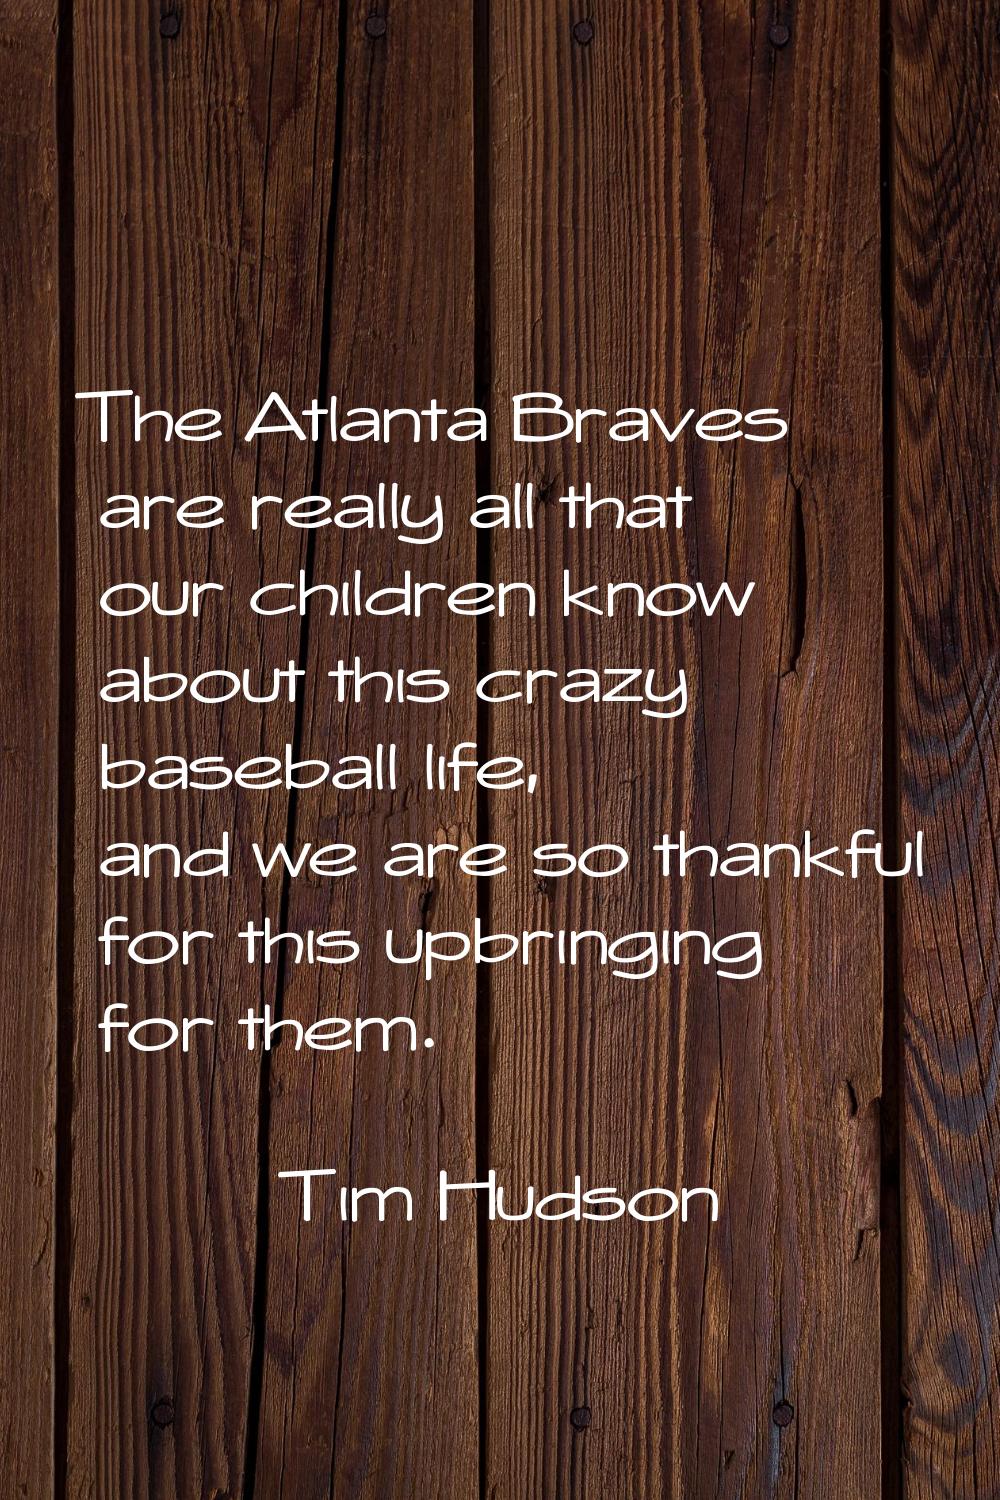 The Atlanta Braves are really all that our children know about this crazy baseball life, and we are